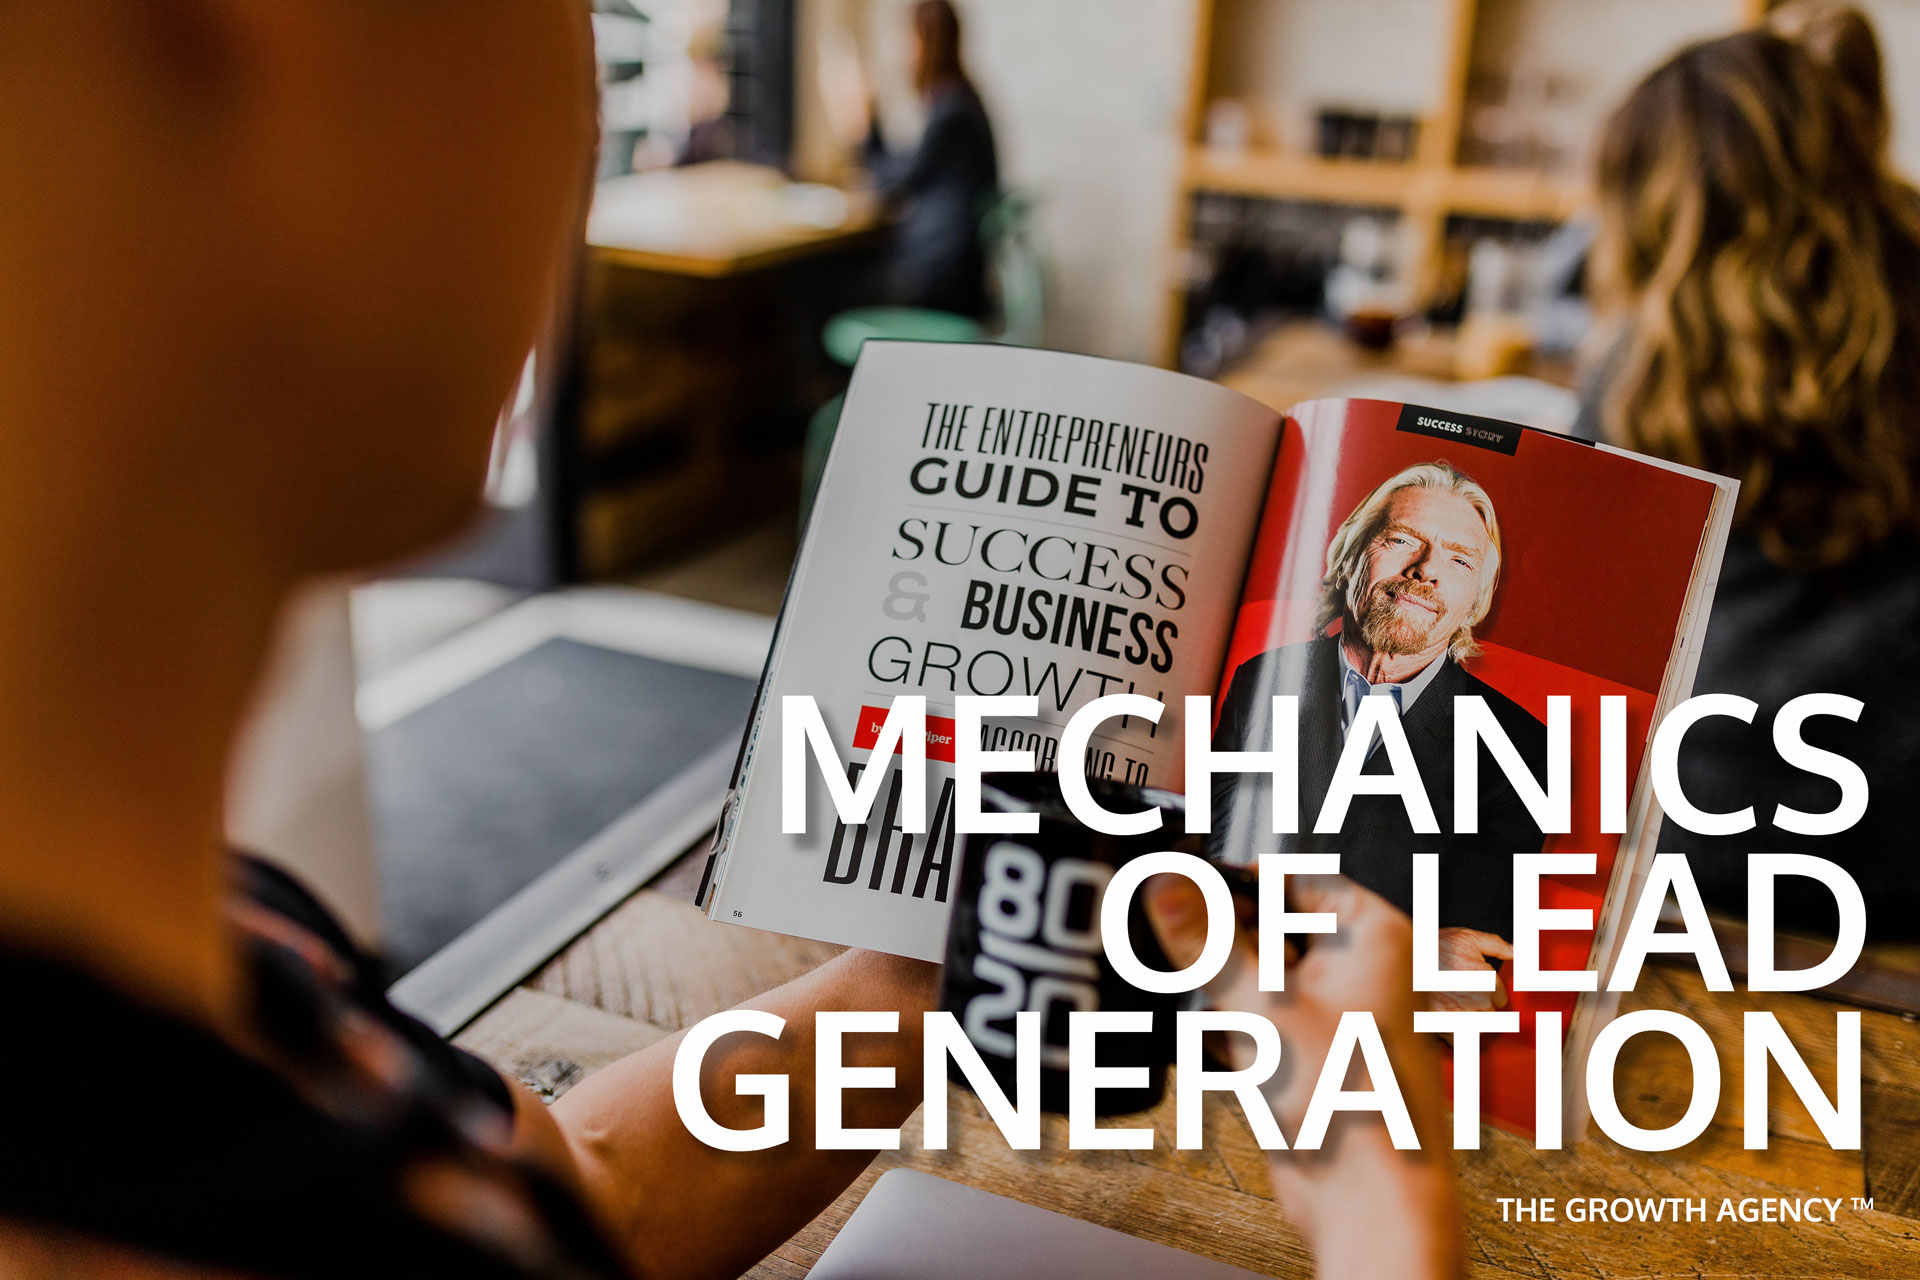 Lead Generation - What are the mechanics?